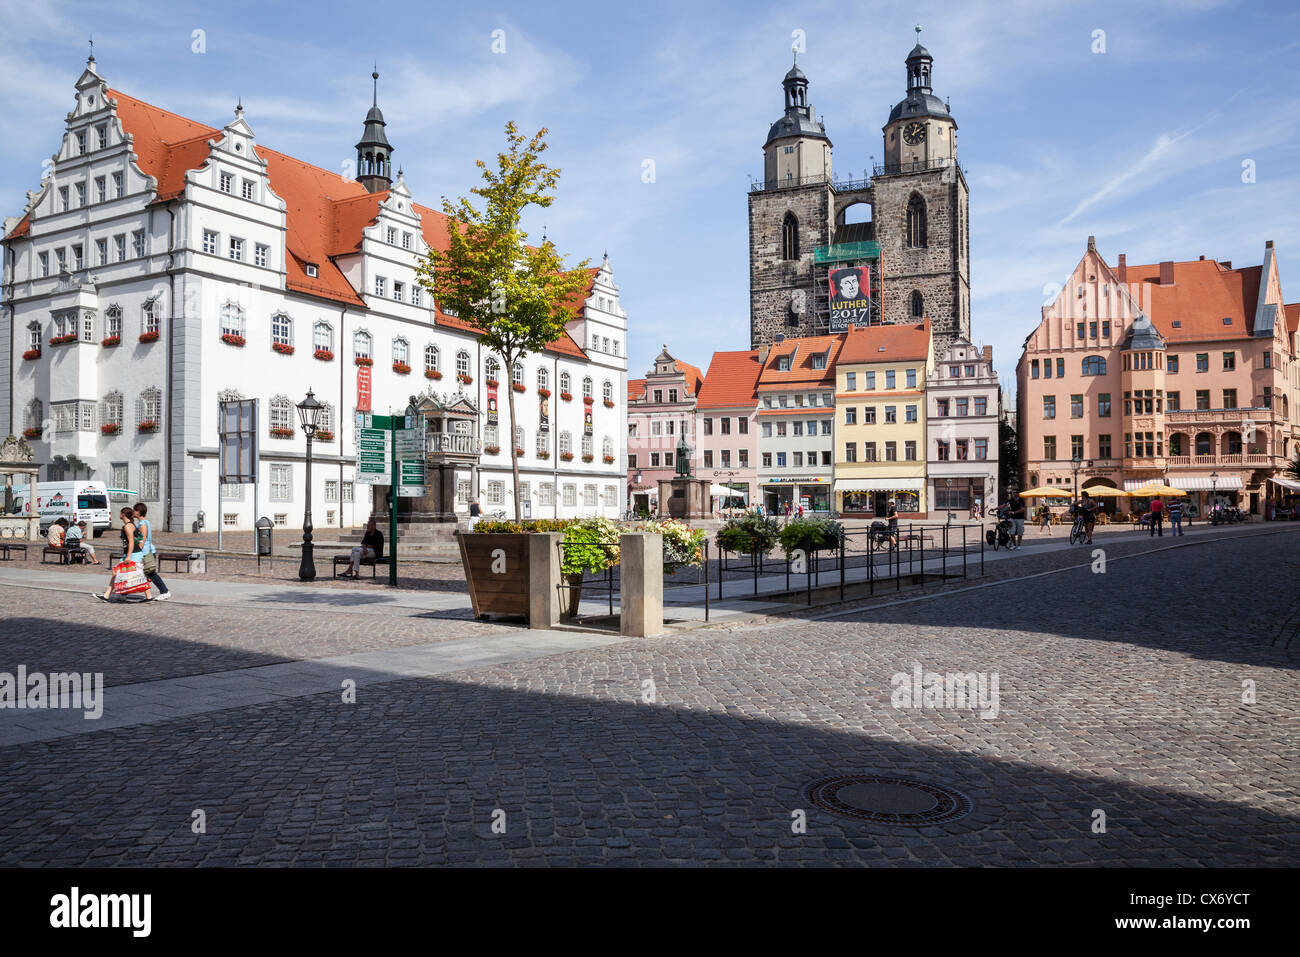 Market Place with Rathaus and Stadtkirche St. Marien, Lutherstadt Wittenberg, Saxony Anhalt, Germany Stock Photo